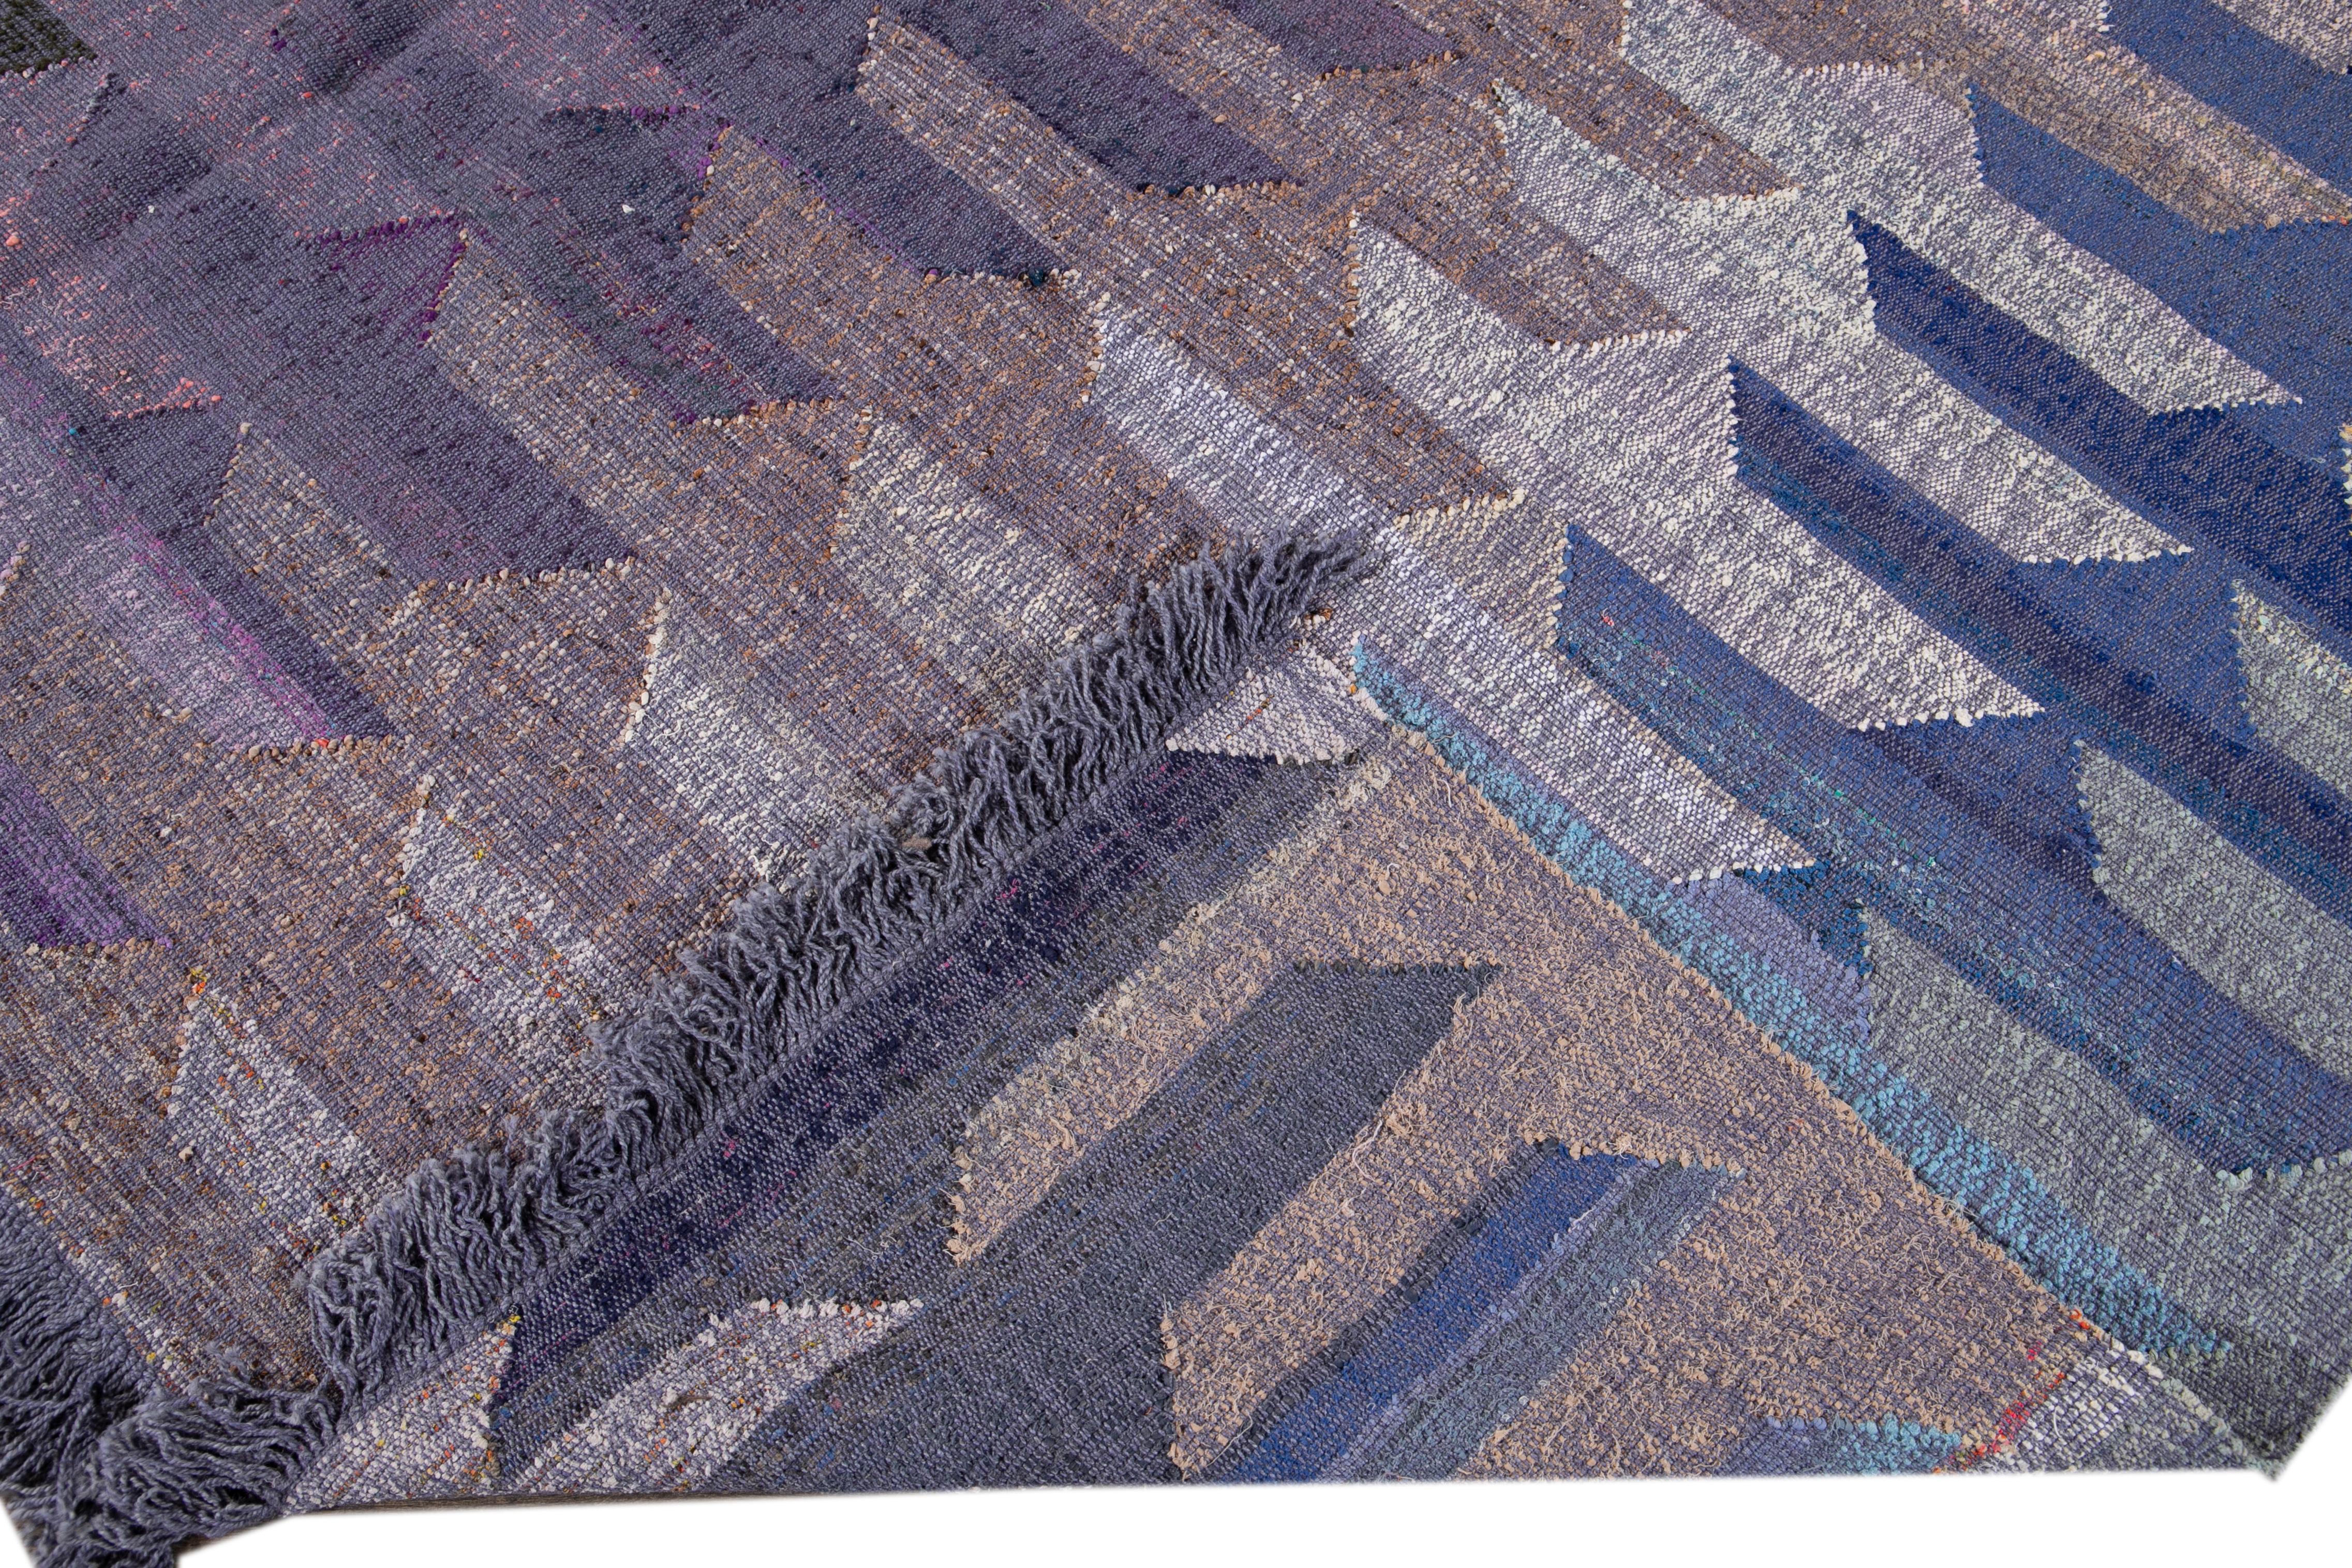 Beautiful modern Kilim flat-weave wool rug with a purple field. This piece of art has blue, green, and yellow accents in a gorgeous geometric abstract design.

This rug measures: 10' x 13'3